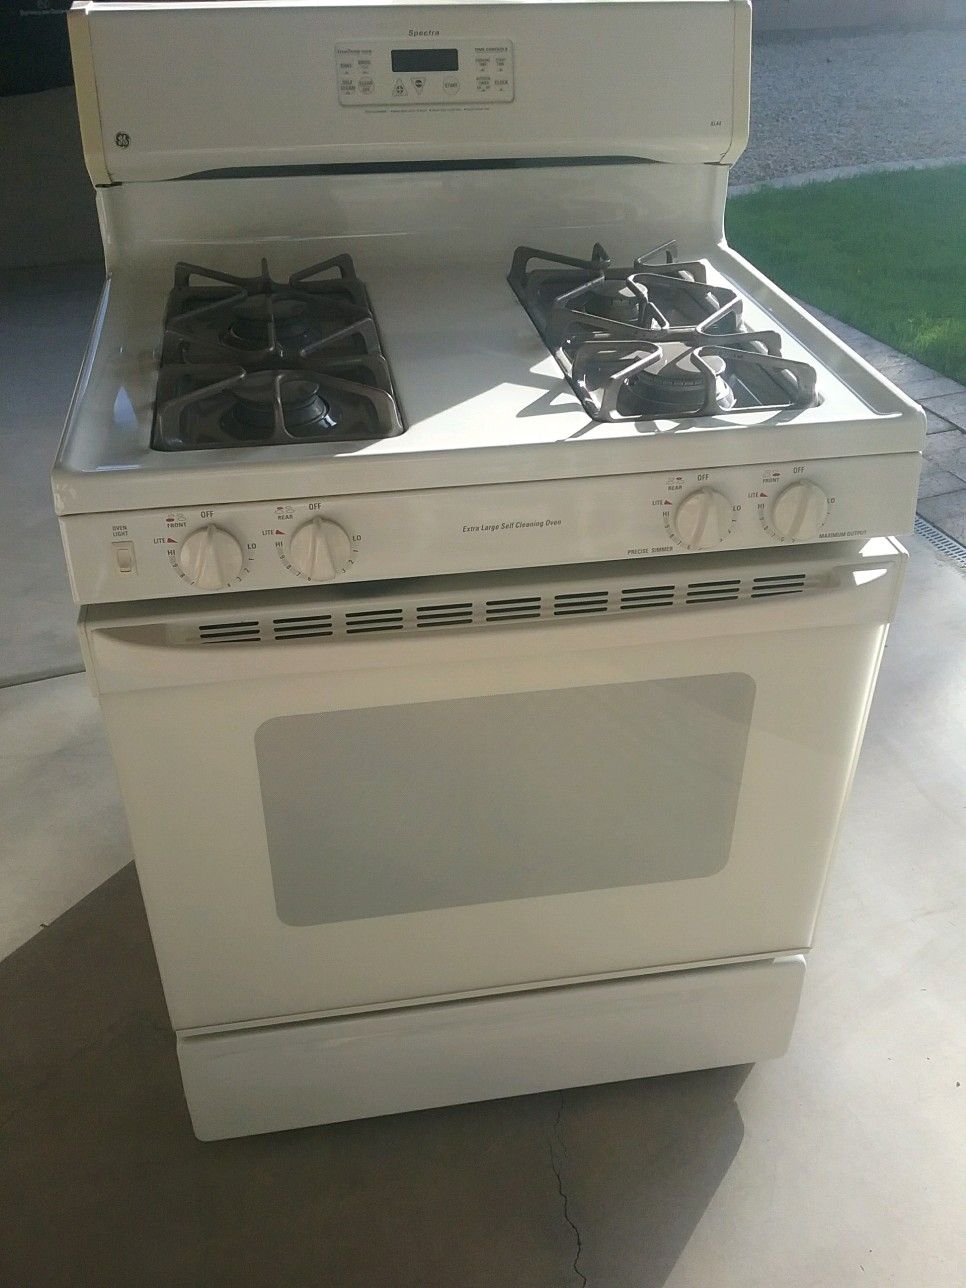 GE Spectra natural gas stove